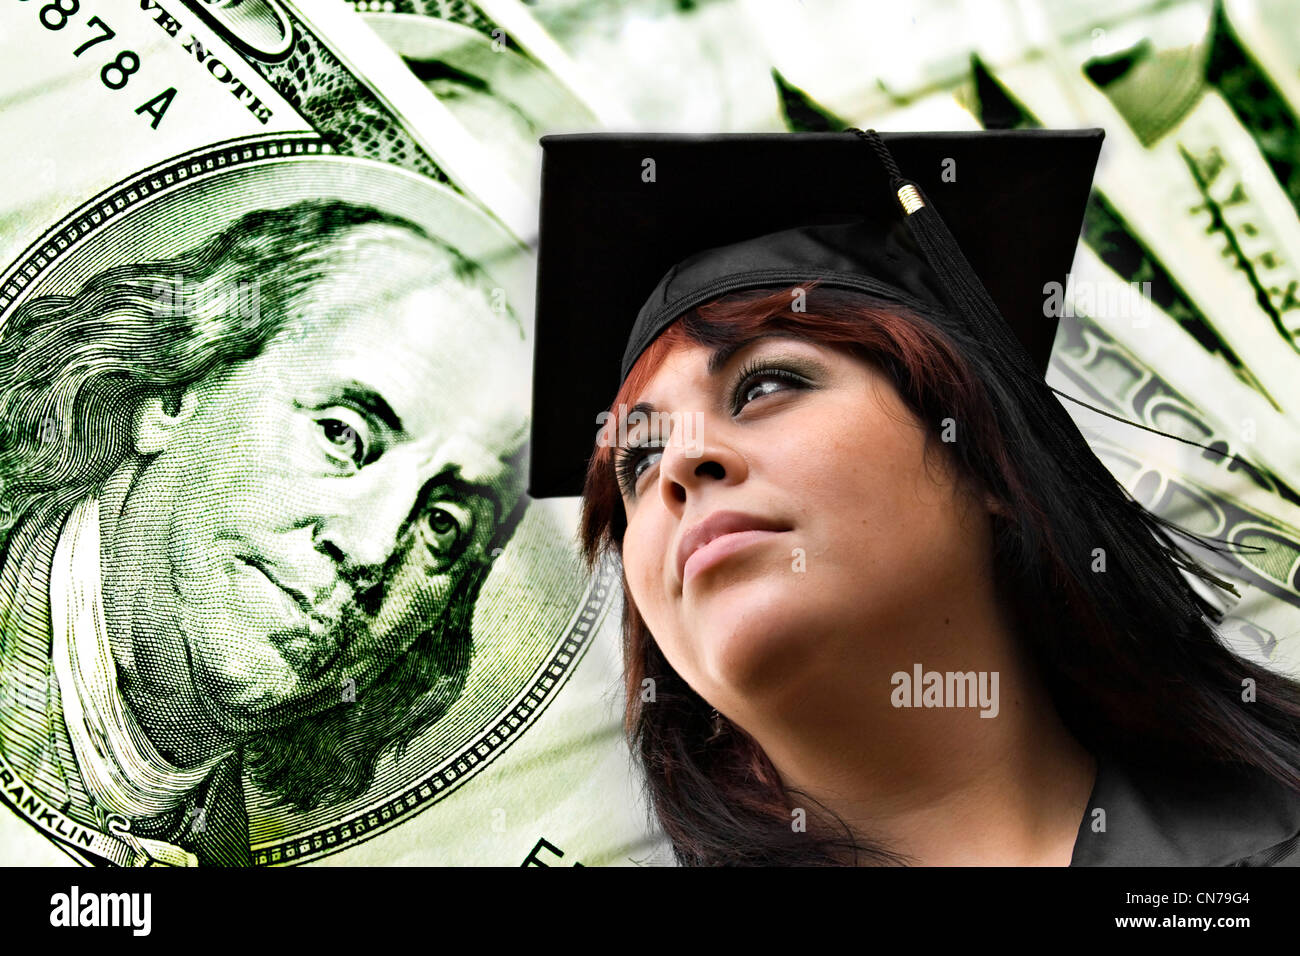 Conceptual image about college scholarships or student loans and education related expenses. Graduate girl wearing cap and gown. Stock Photo